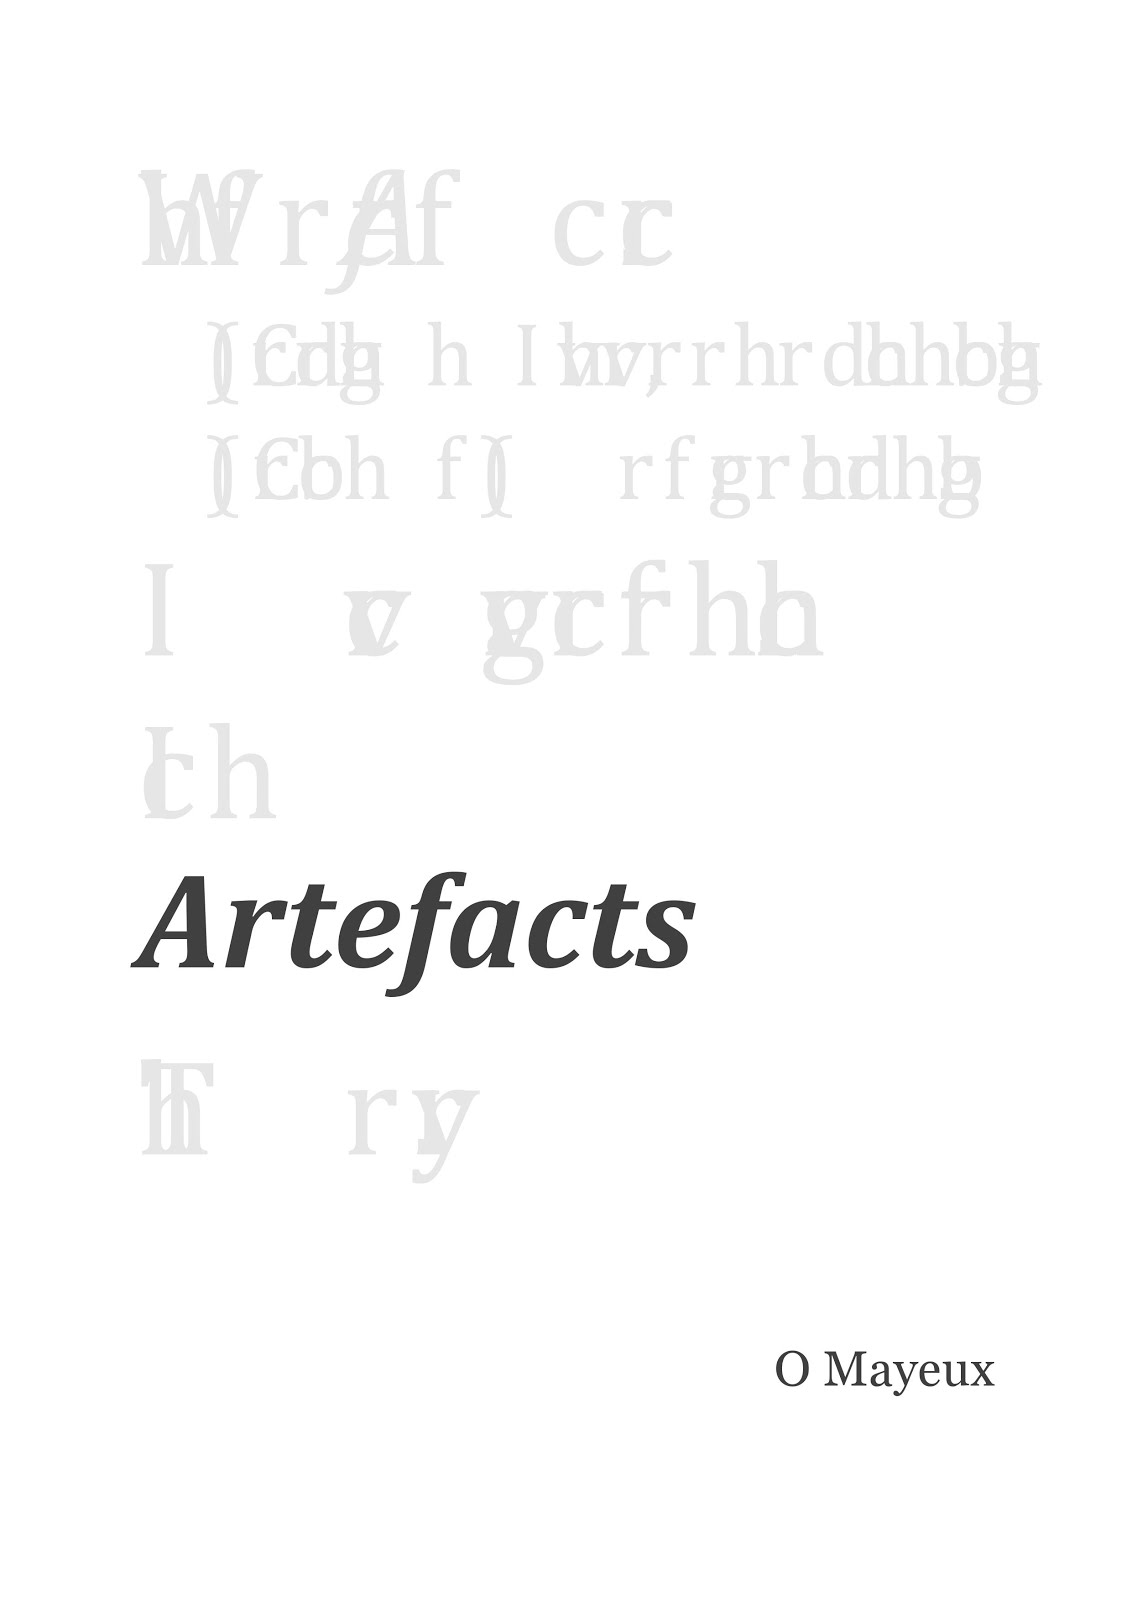 Available Now @ Amazon! Artefacts by O Mayeux